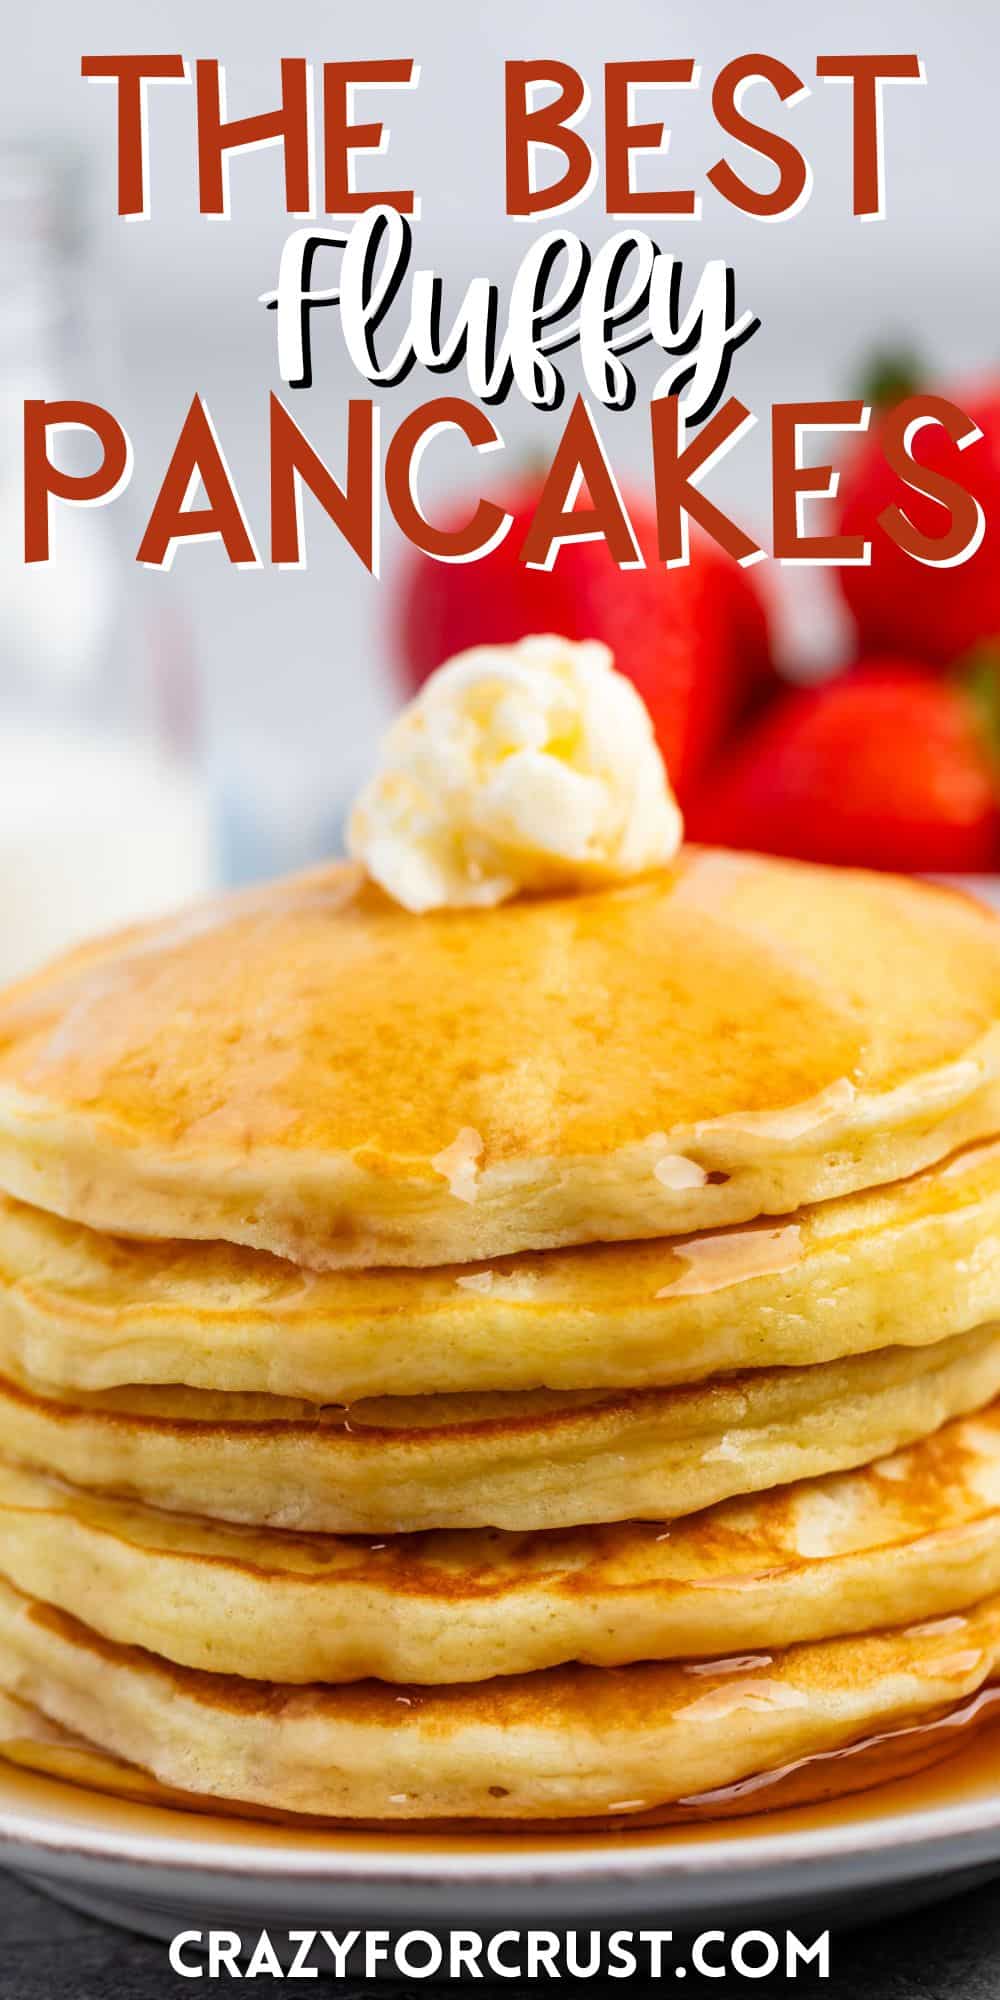 a stack of pancakes with syrup and butter on top with words on the image.